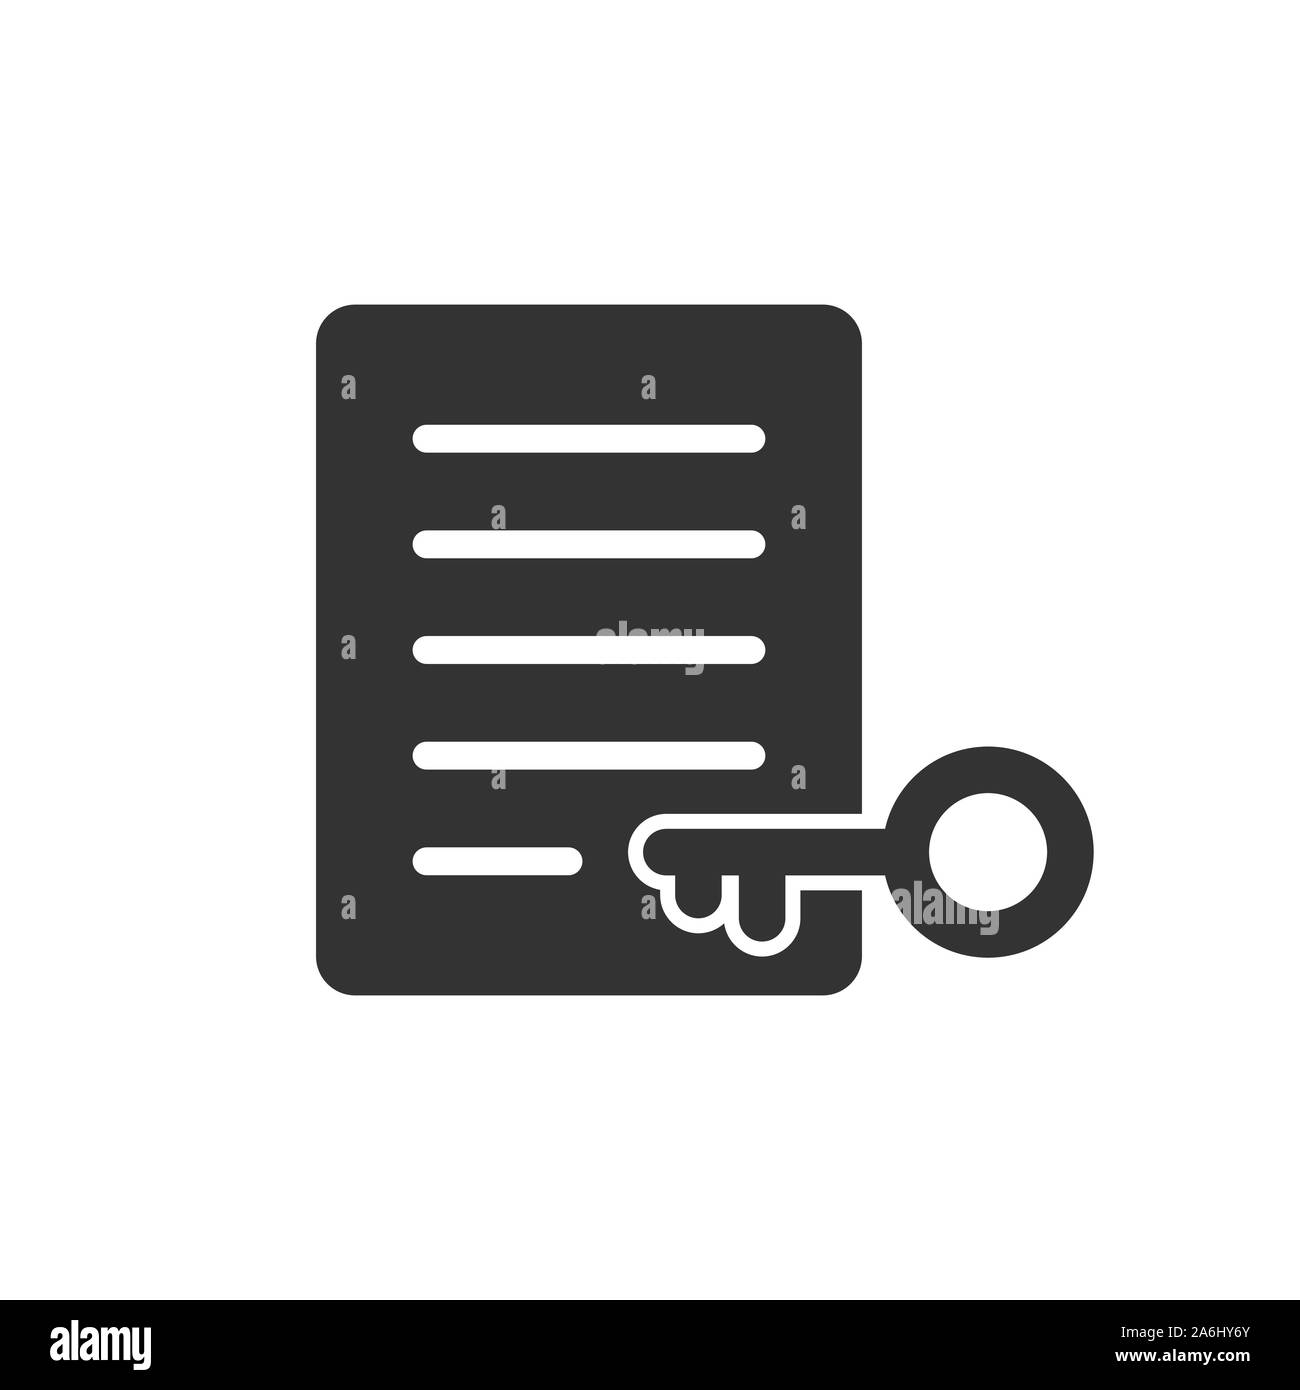 Password account icon in flat style. Keyword vector illustration on white isolated background. Key combination business concept. Stock Vector